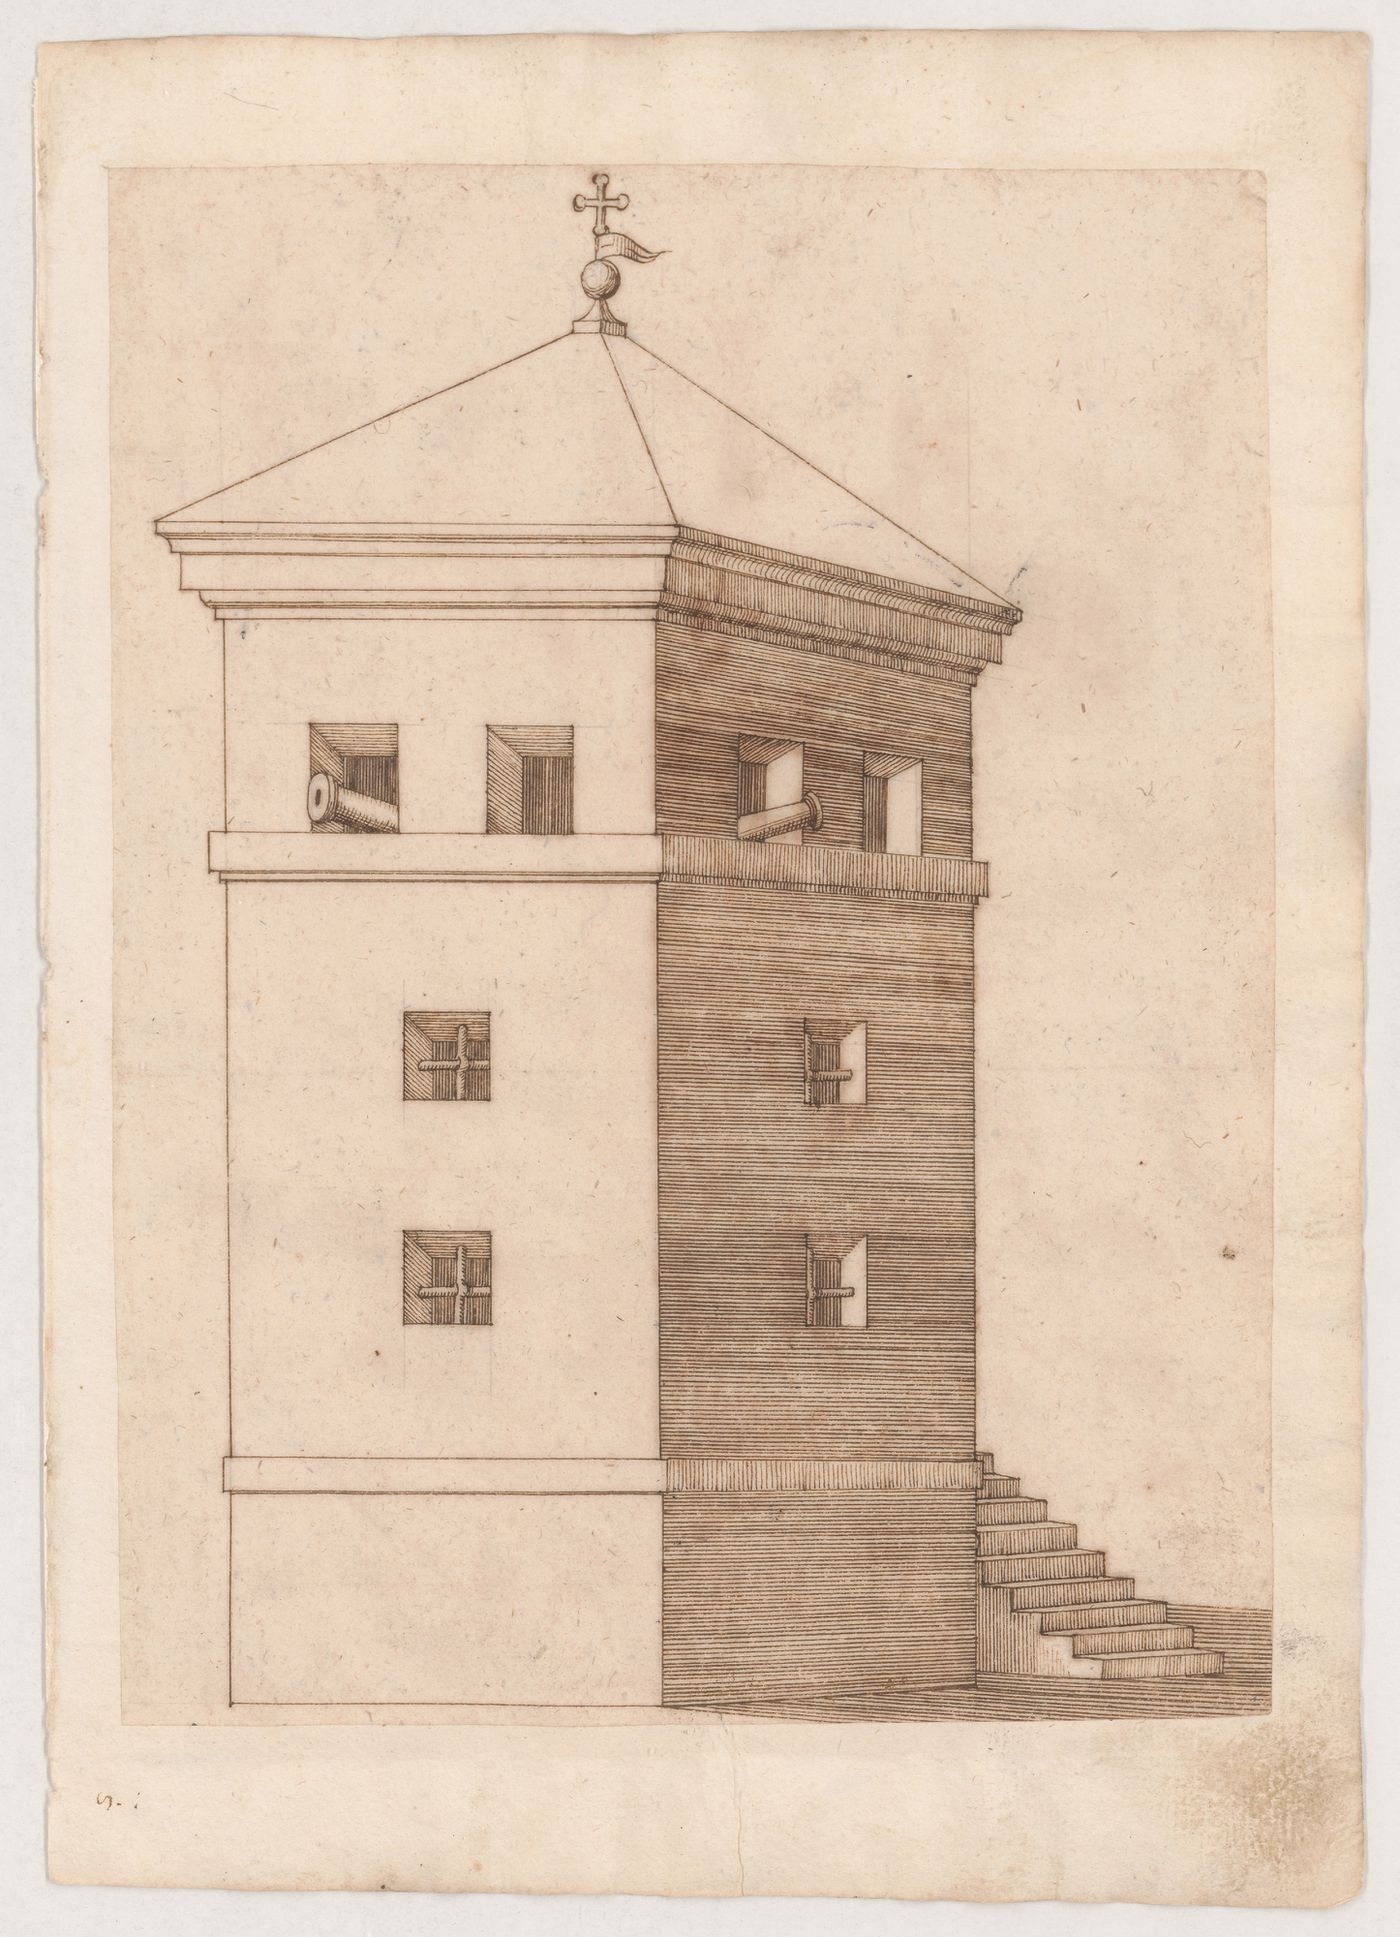 Elevation of a fortified tower with cannons; verso: View of the Ponte Felice, Borghetto; Offset images of a bridge and an architectural detail